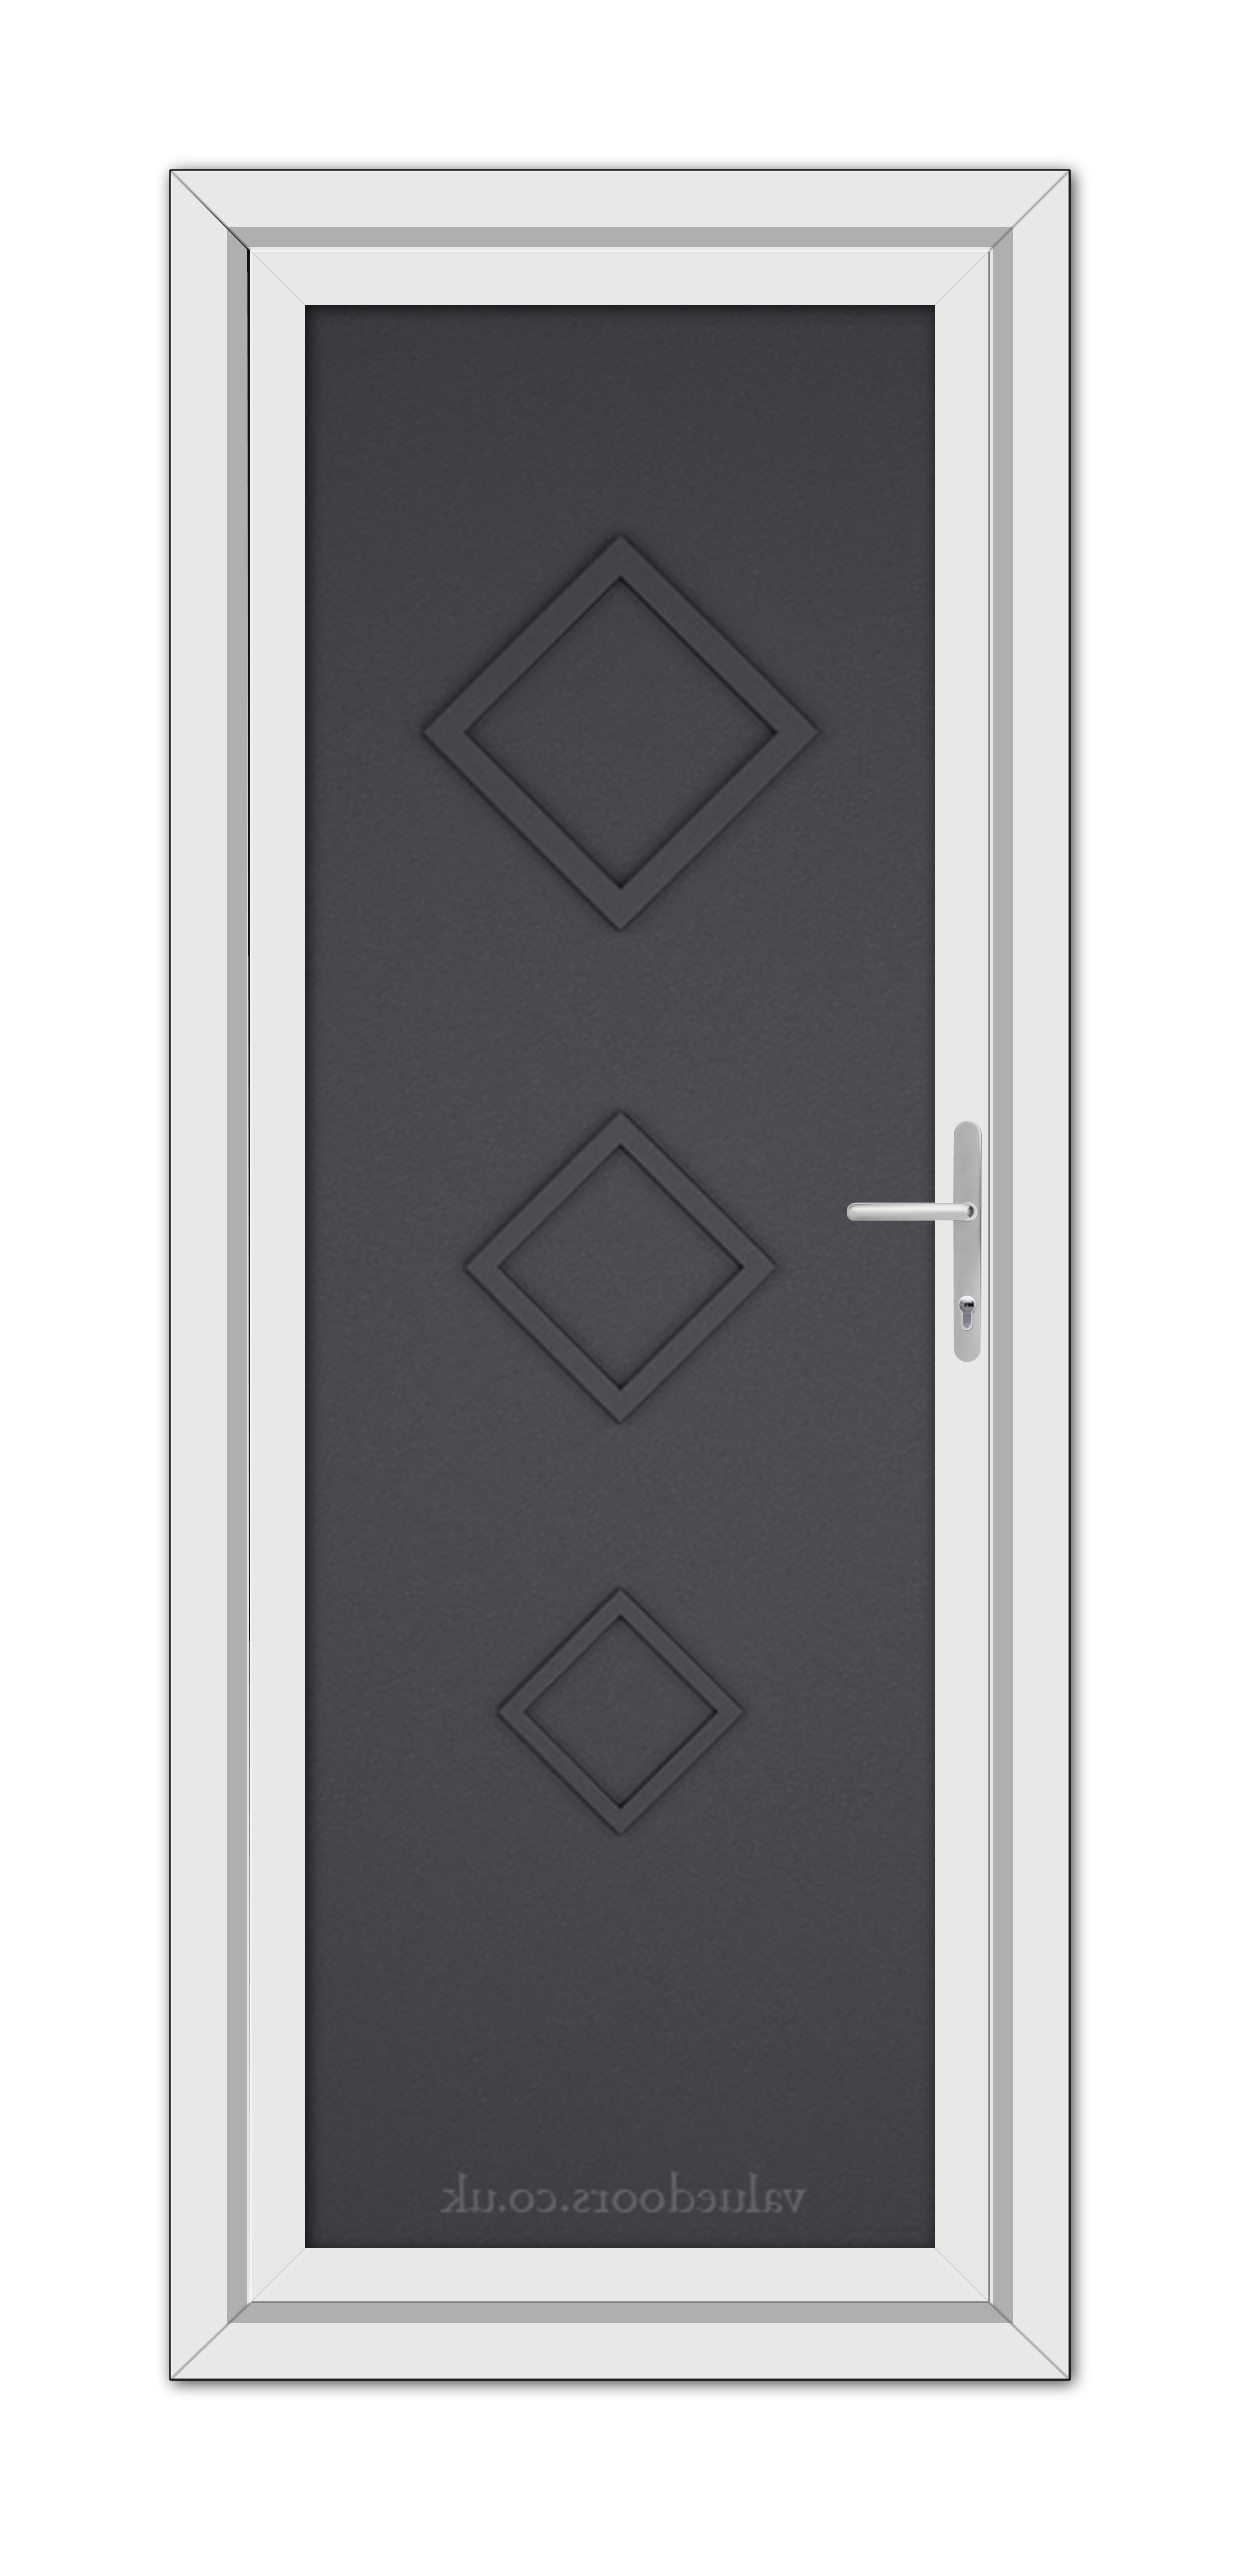 A Grey Grained Modern 5123 Solid uPVC door with a vertical handle and three diamond-shaped panels, set within a white frame.